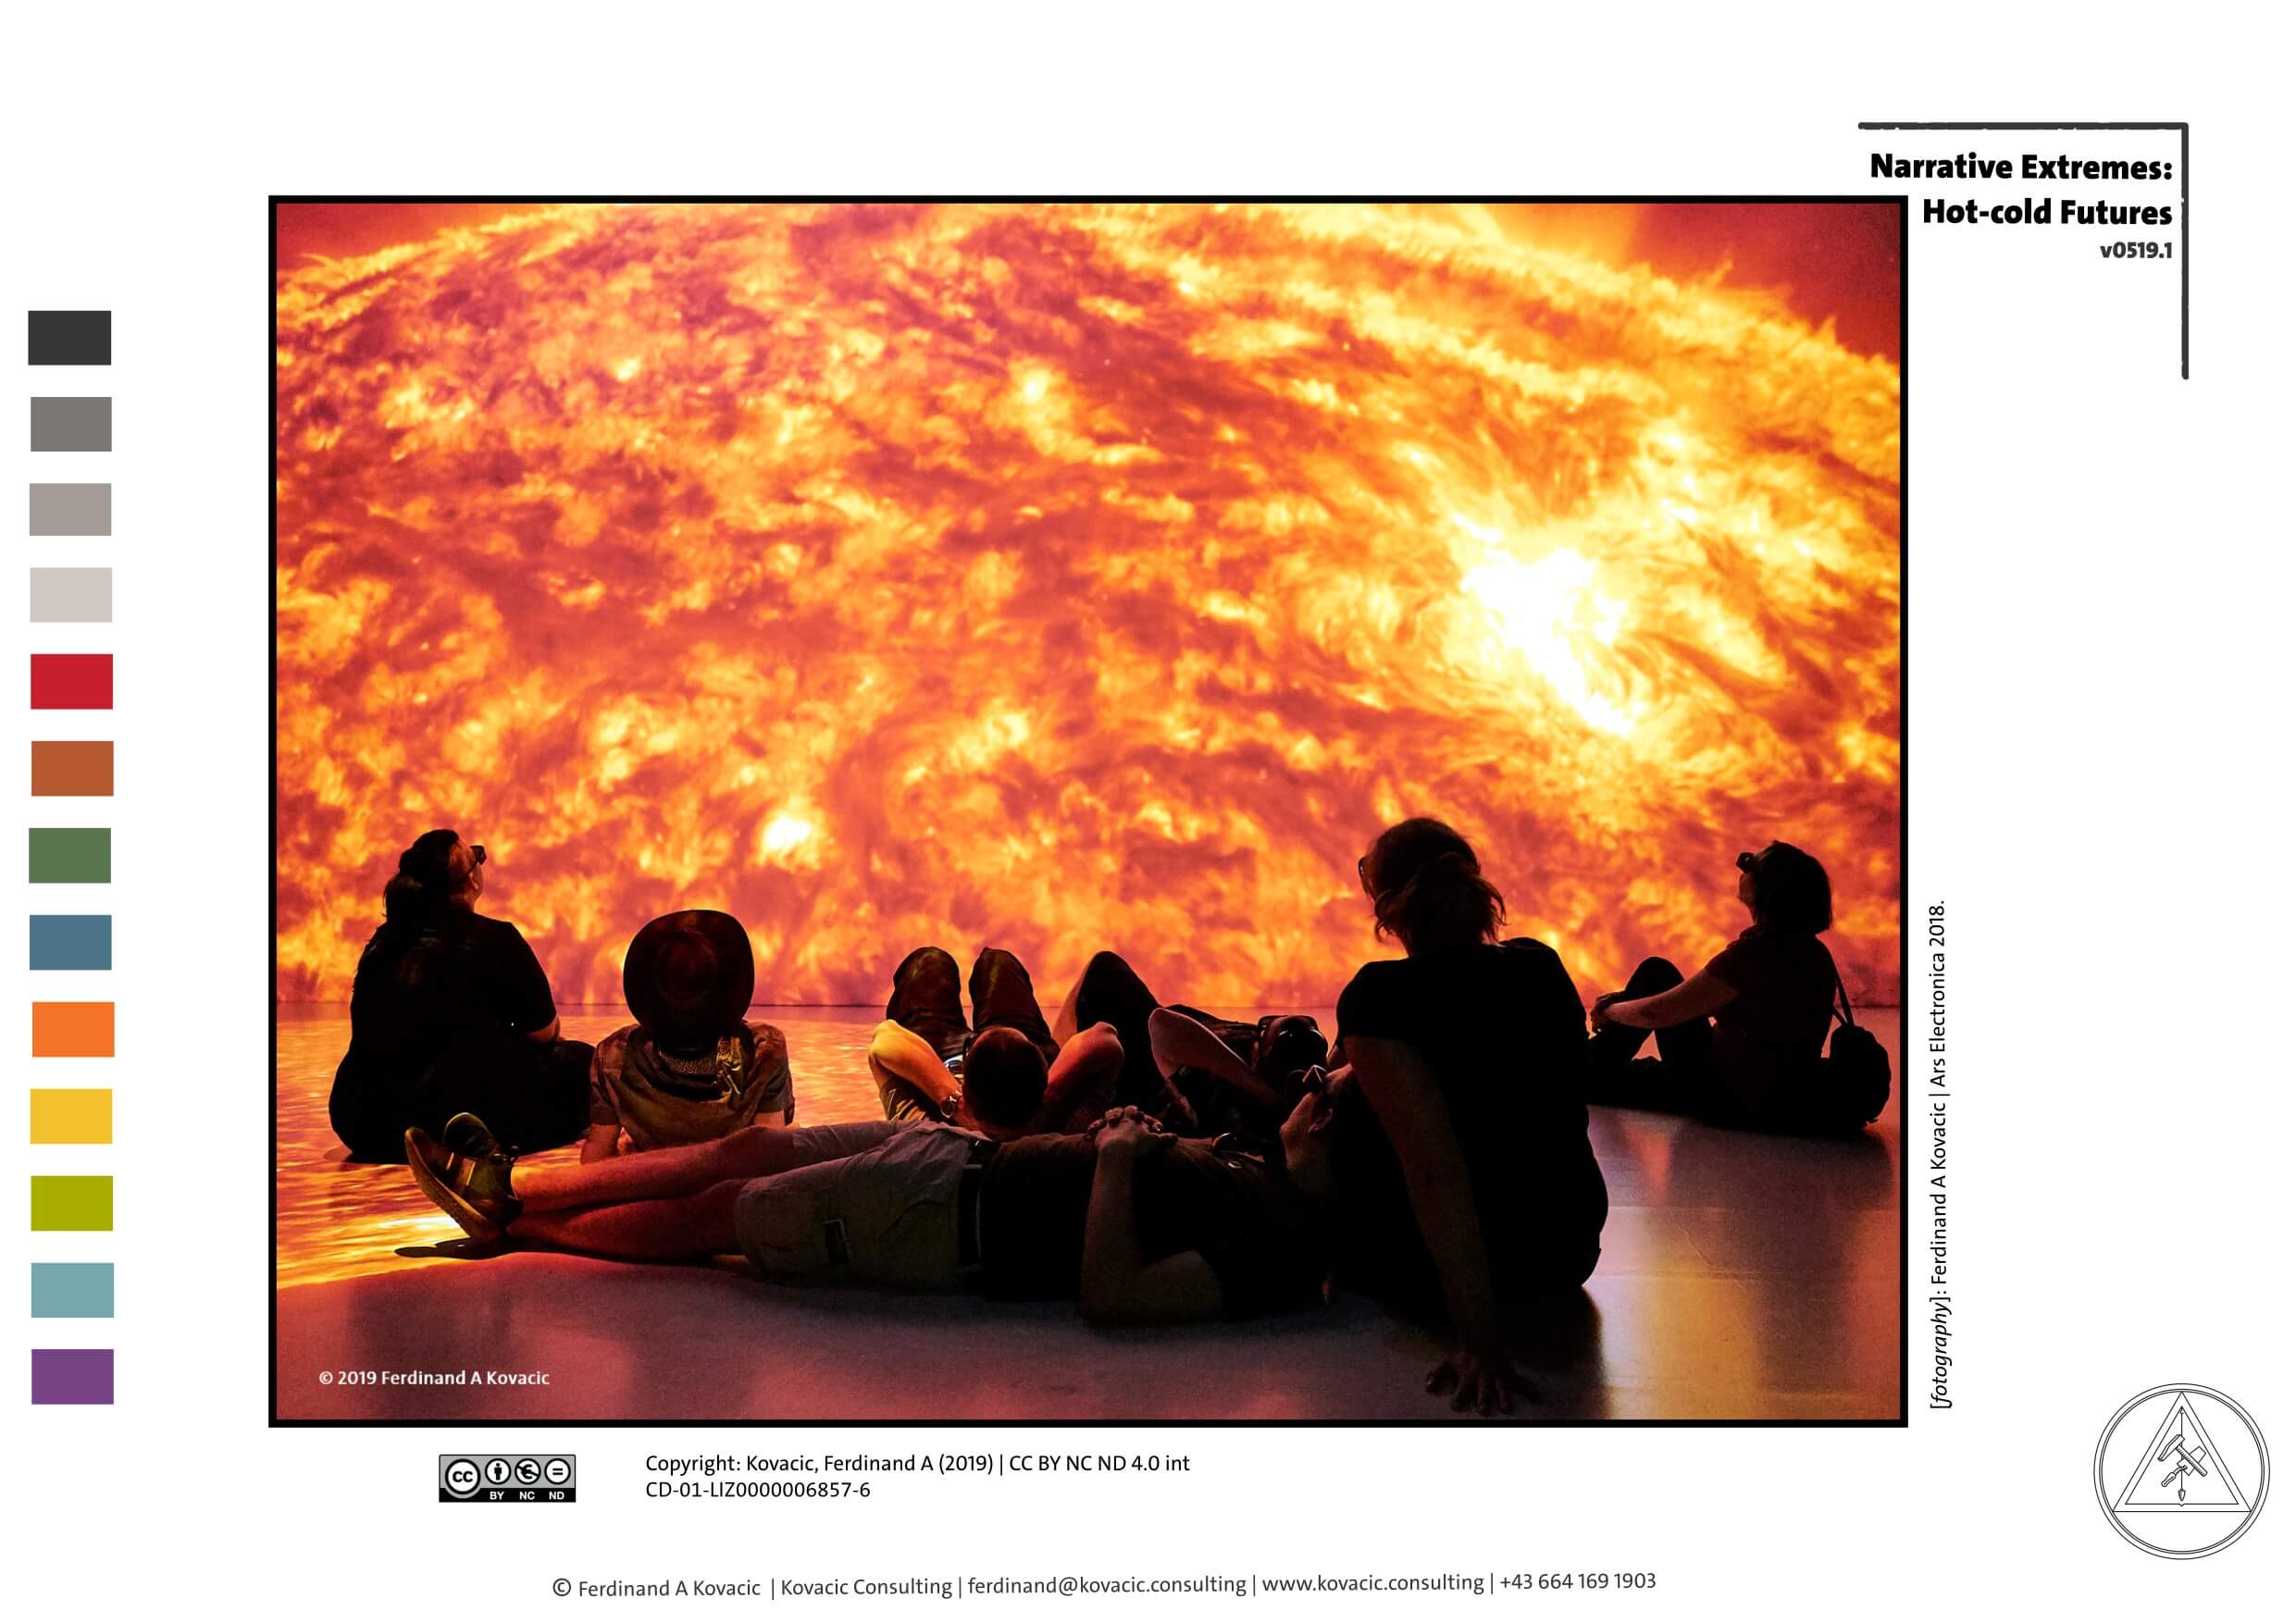 Narrative Extremes. Hot-cold Futures. Ars Electronica. Linz